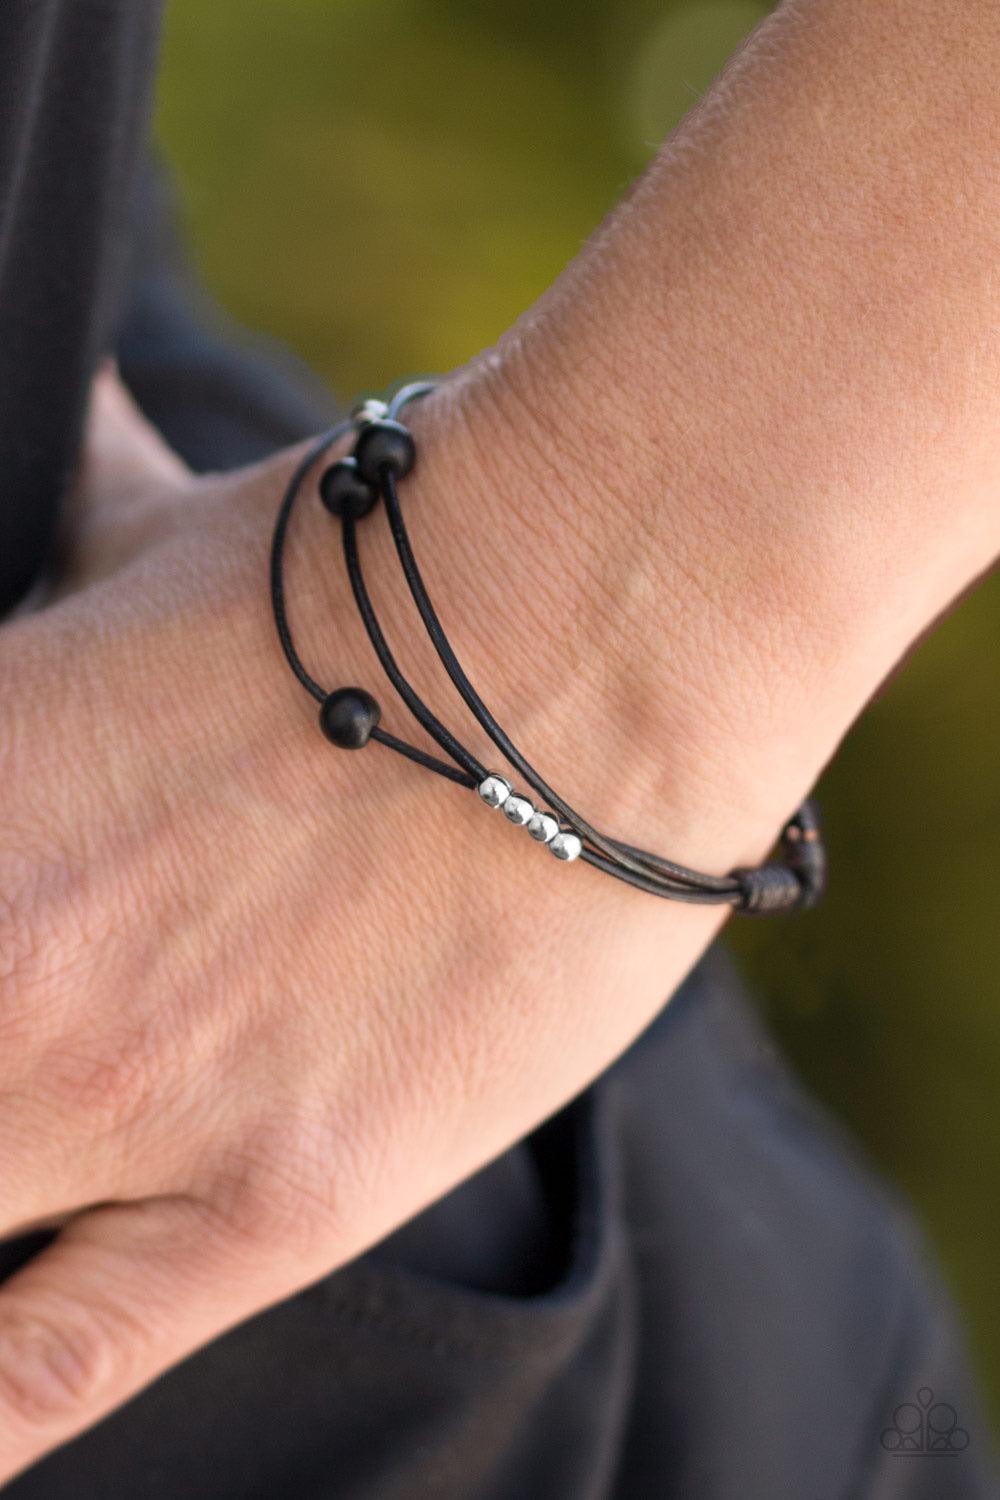 Paparazzi Accessories Mountain Treasure - Black Shiny silver beads and refreshing white stones are threaded along shiny black cording, creating dainty layers across the wrist. Features an adjustable sliding knot closure. Sold as one individual bracelet. J